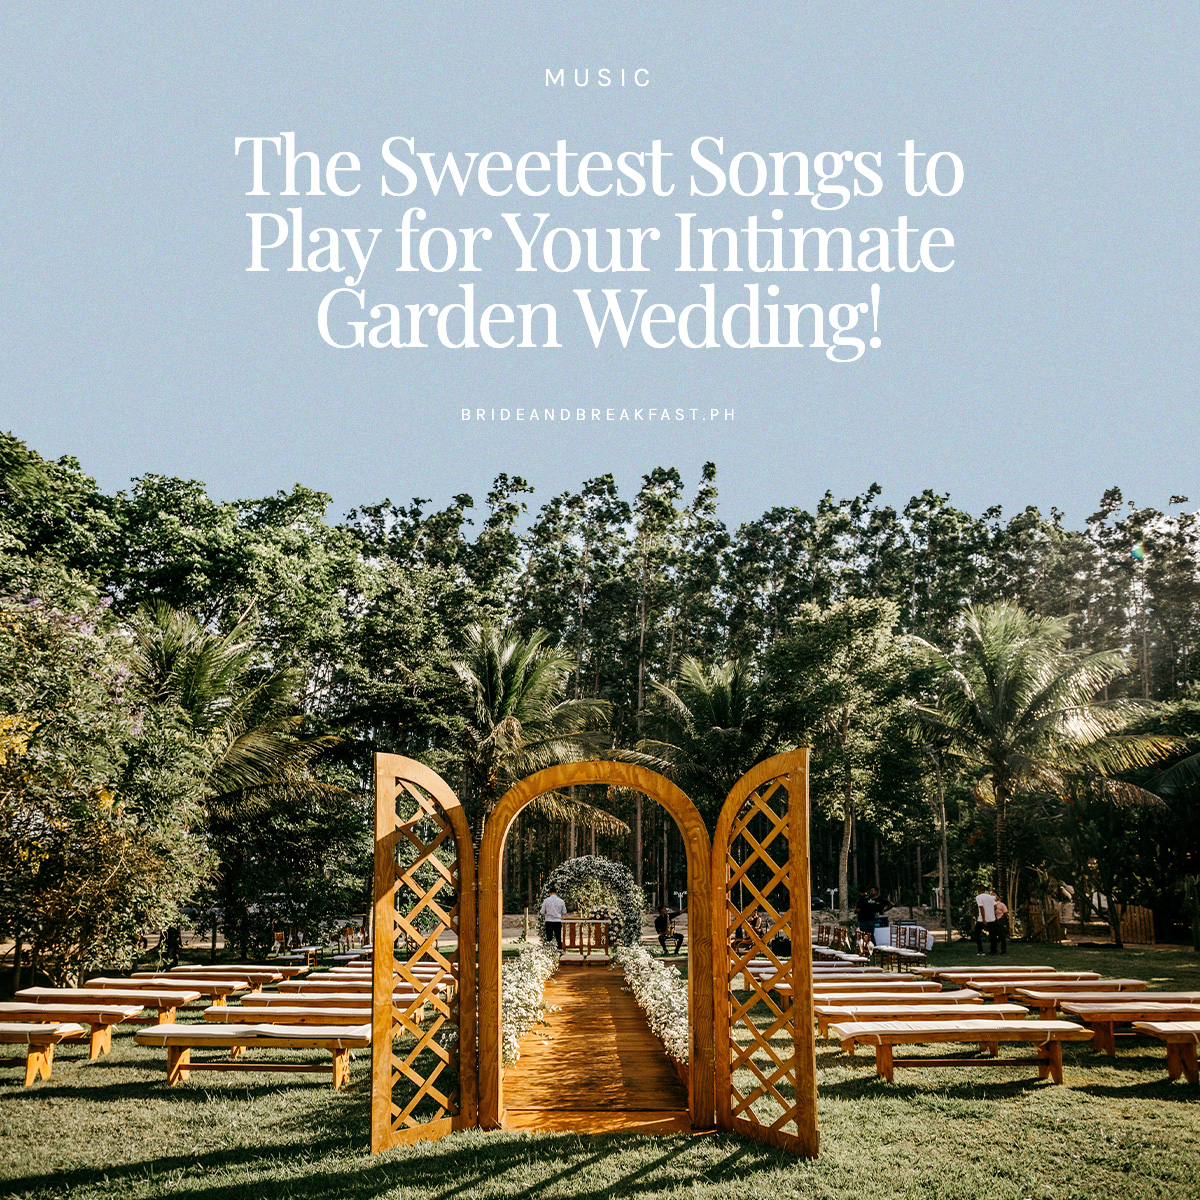 The Sweetest Songs to Play for Your Intimate Garden Wedding!